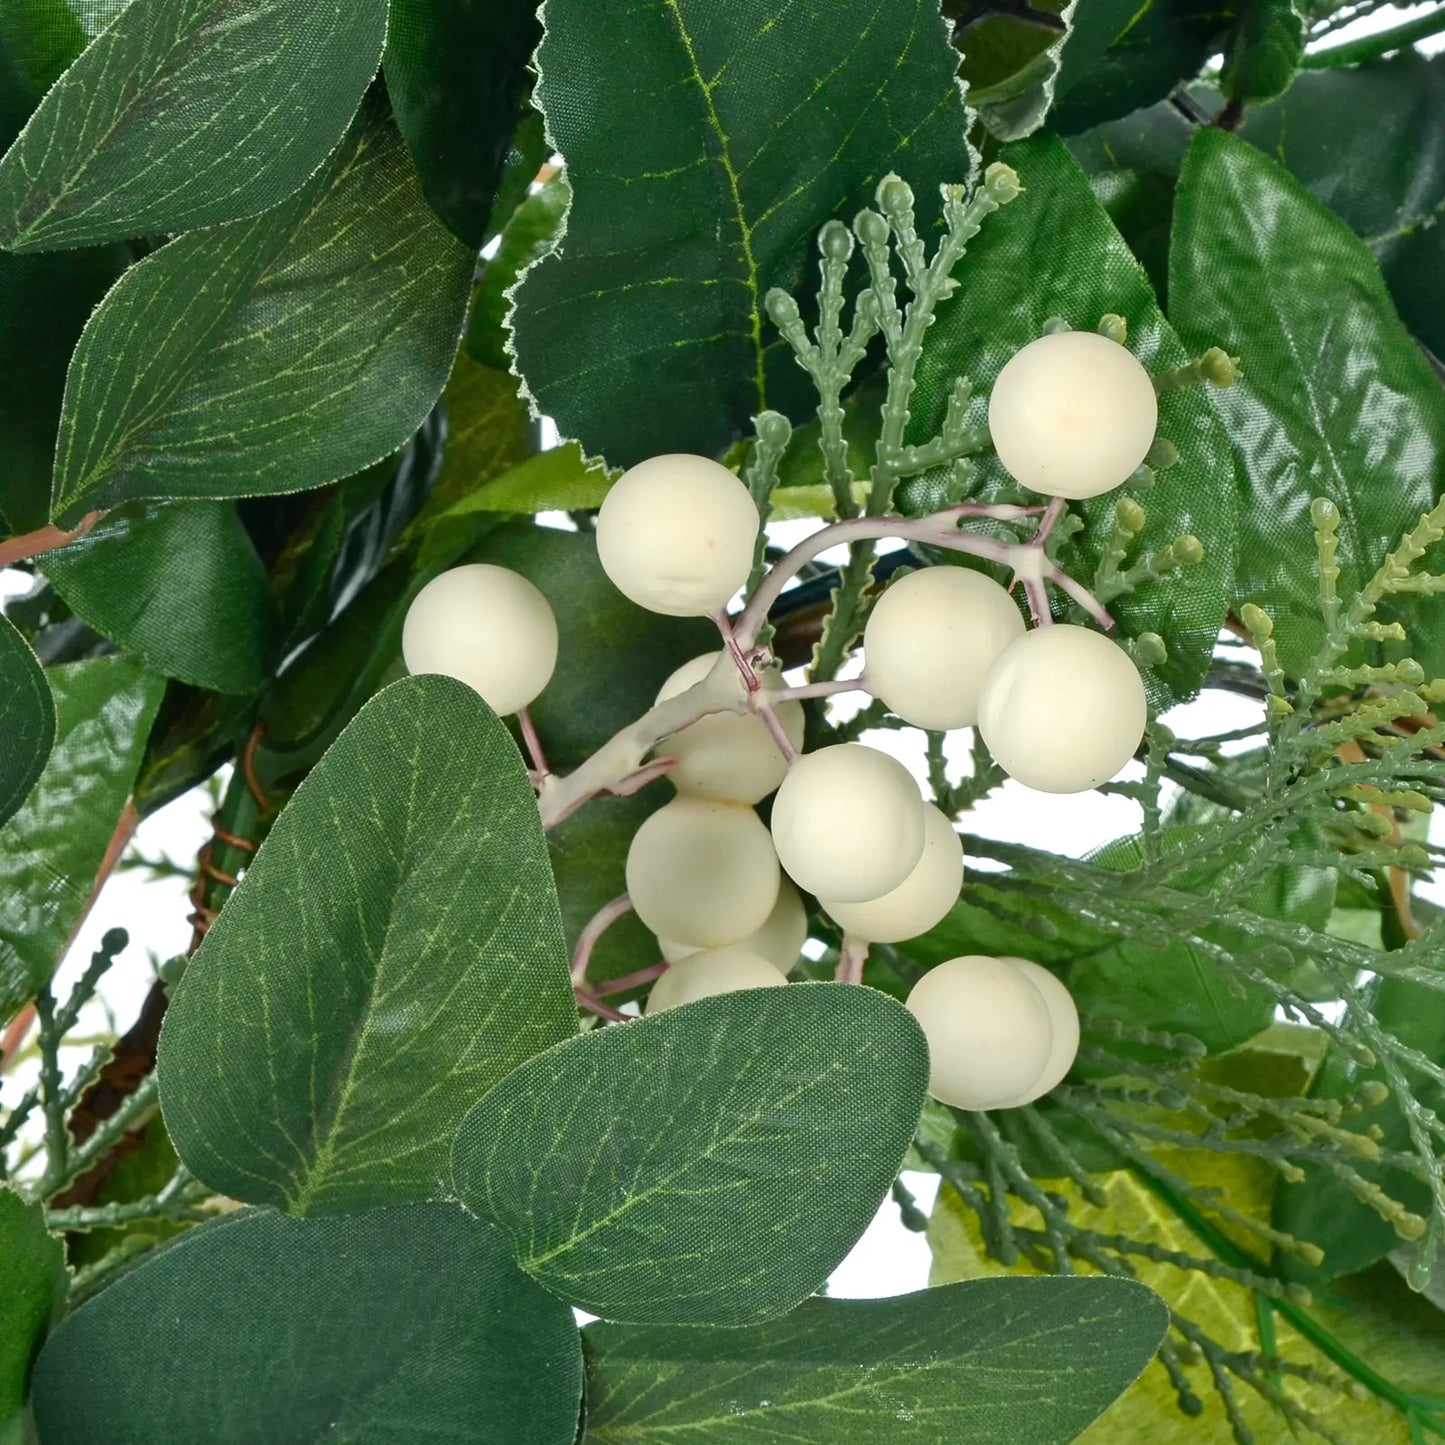 detail shot of white berry clusters nestled amongst green pe and silk foliage